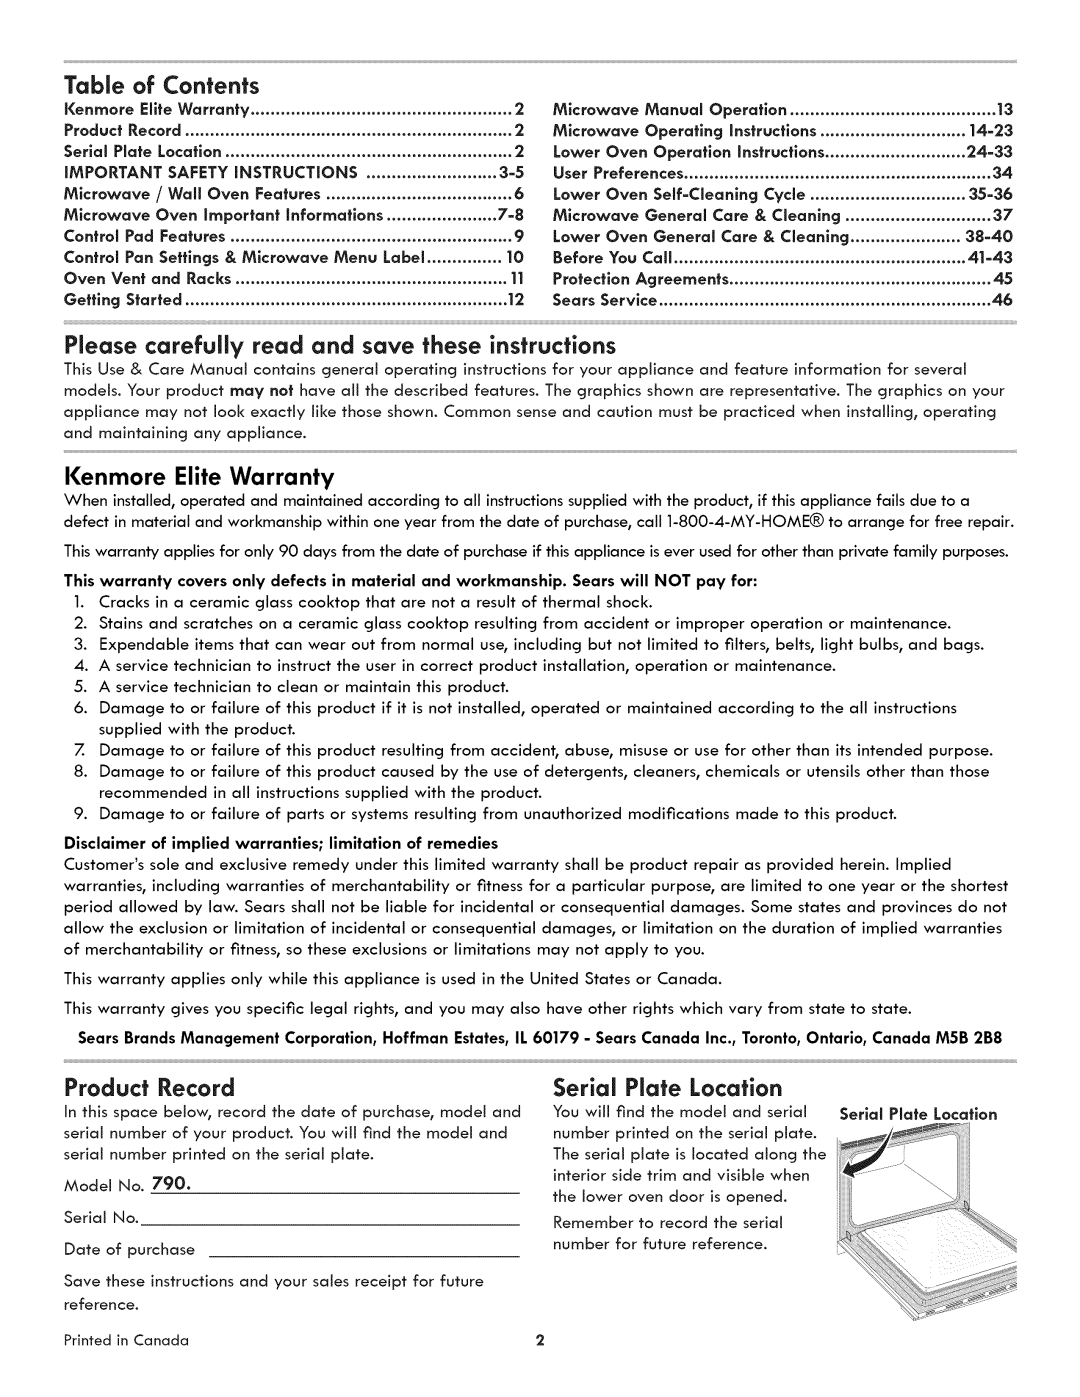 Kenmore 790.489 Table, of Contents, Please carefully read and save these instructions, Kenmore Elite Warranty, Microwave 